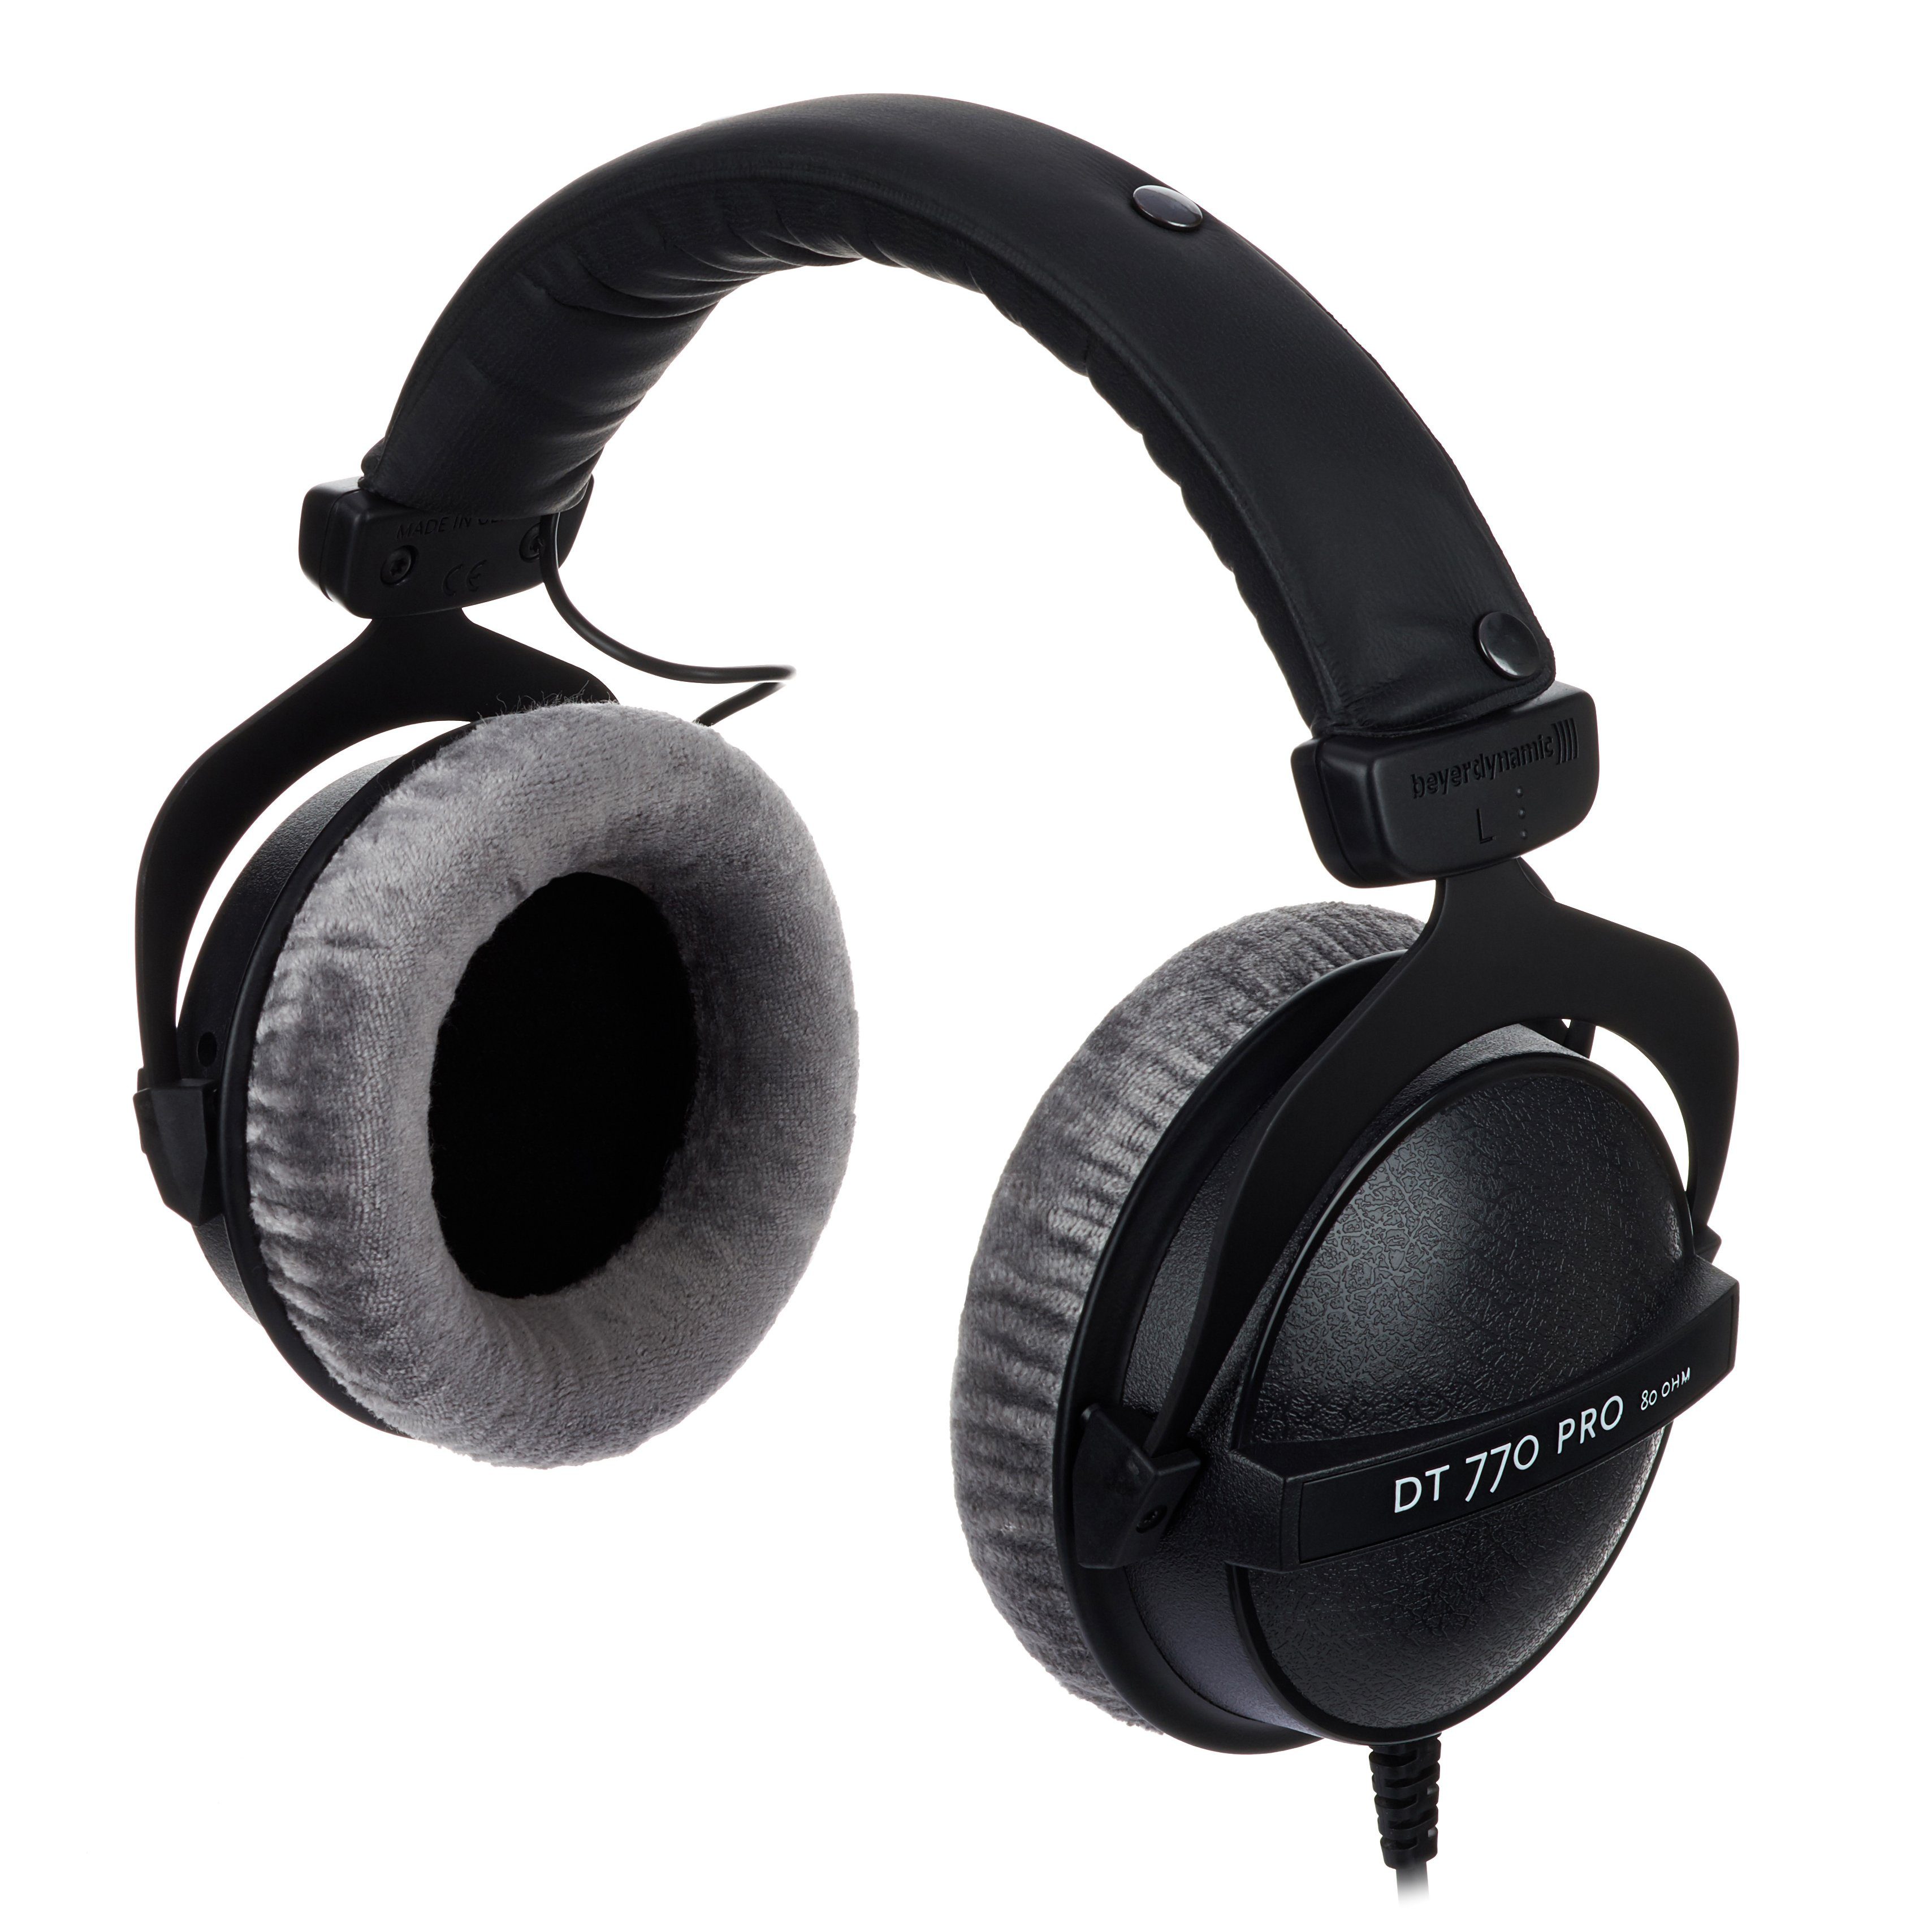 Beyerdynamic DT770 Pro  Headphone Reviews and Discussion 